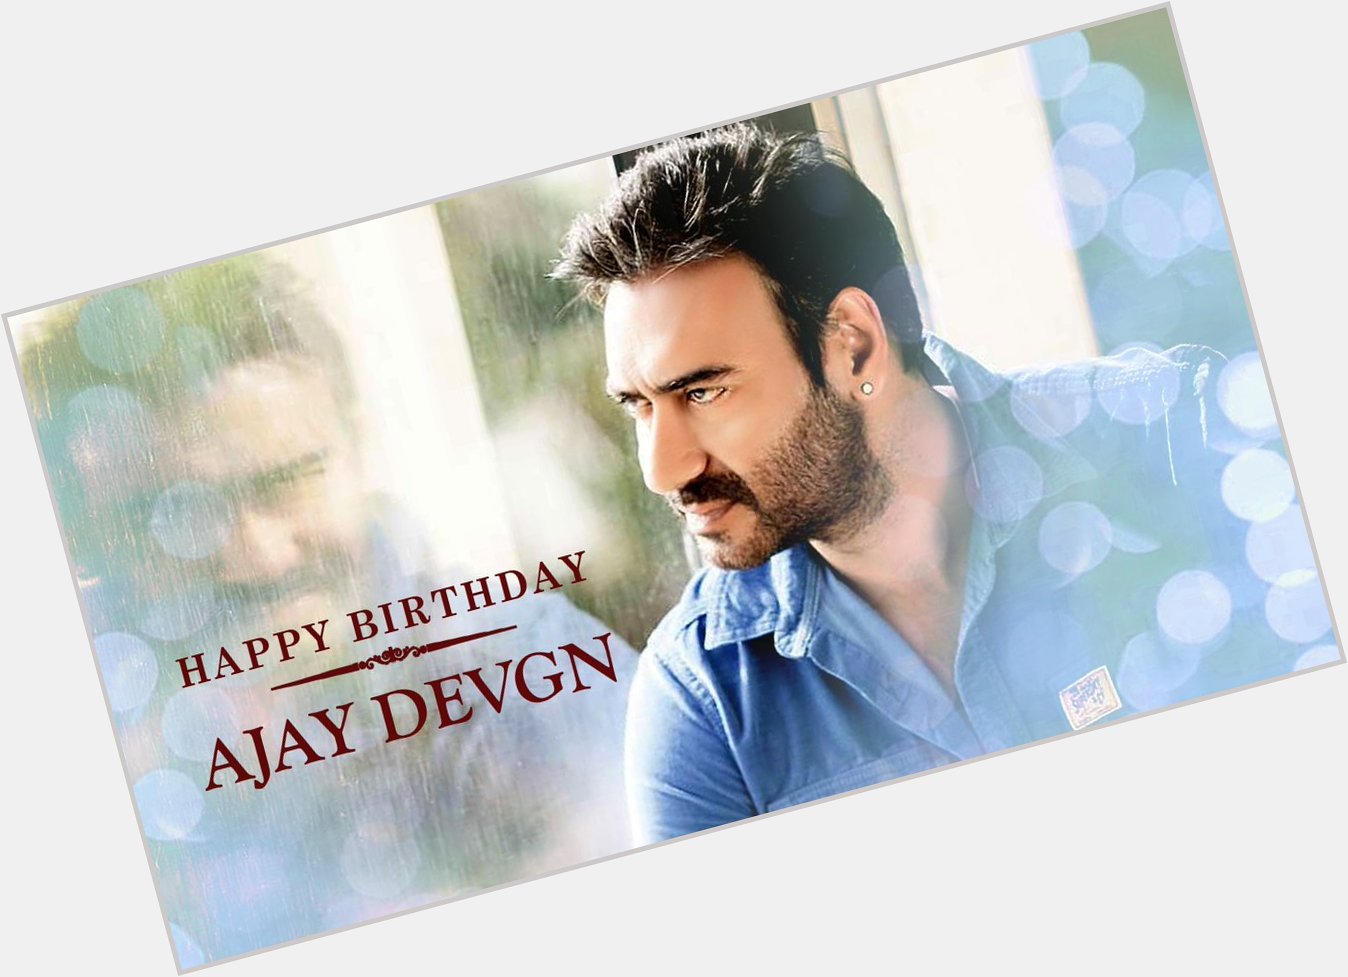 Happy birthday ajay devgn.. Long life and happiness always in your.. 